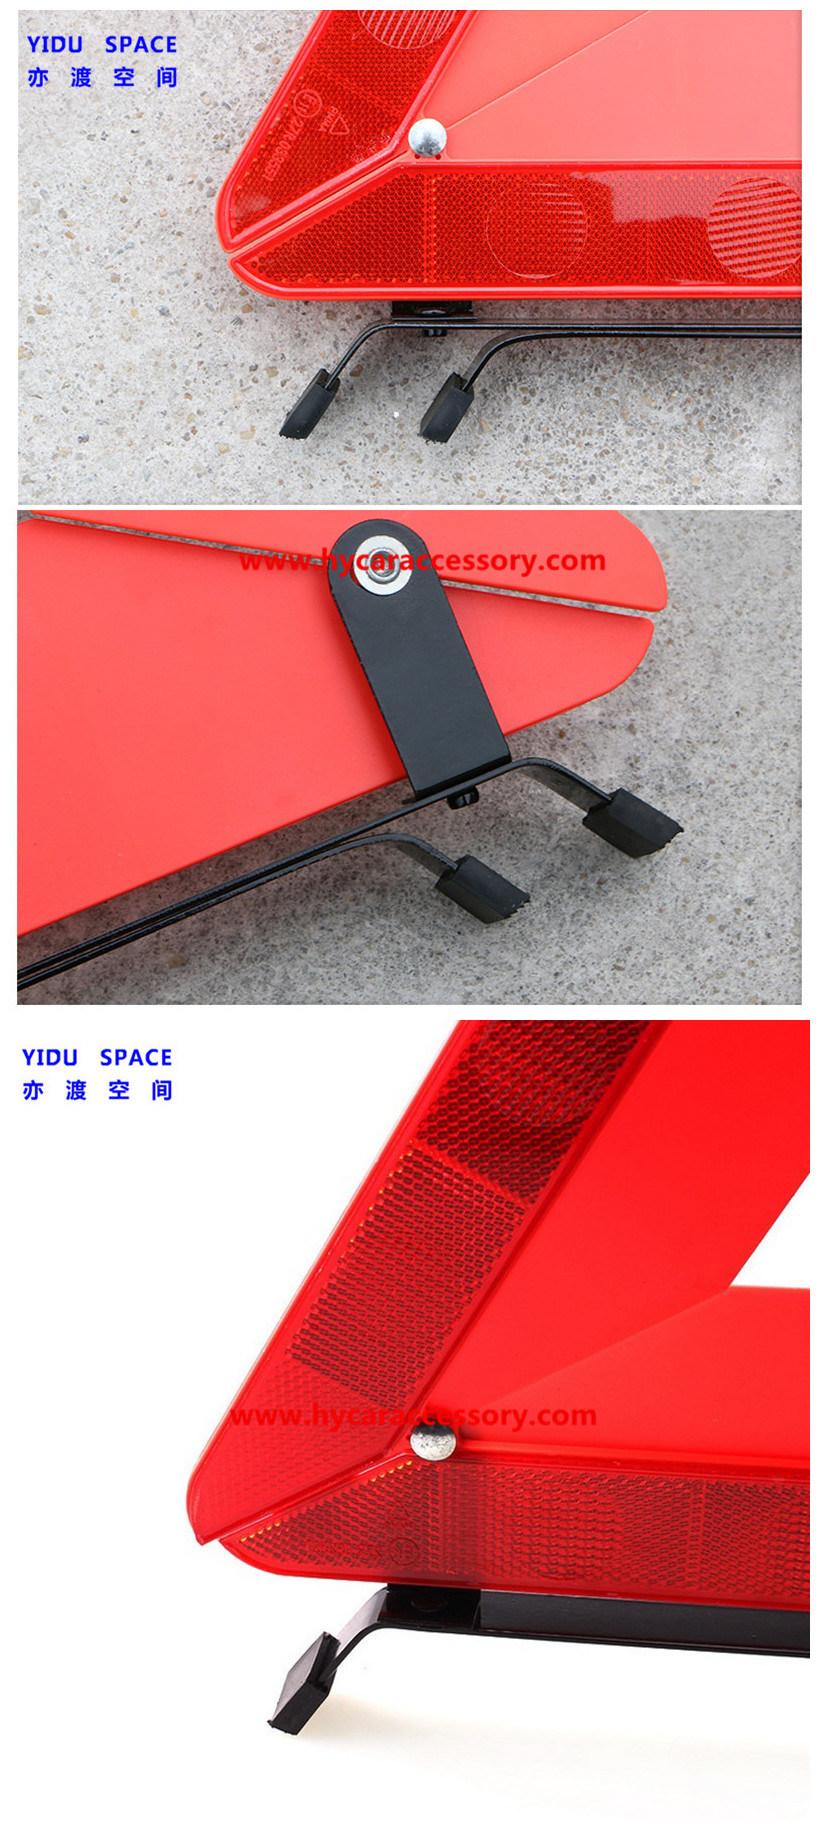 CE Certification Road Safety Emergency Reflective Foldable Reflective Auto Car Warning Emergency Triangle for Traffic Safety